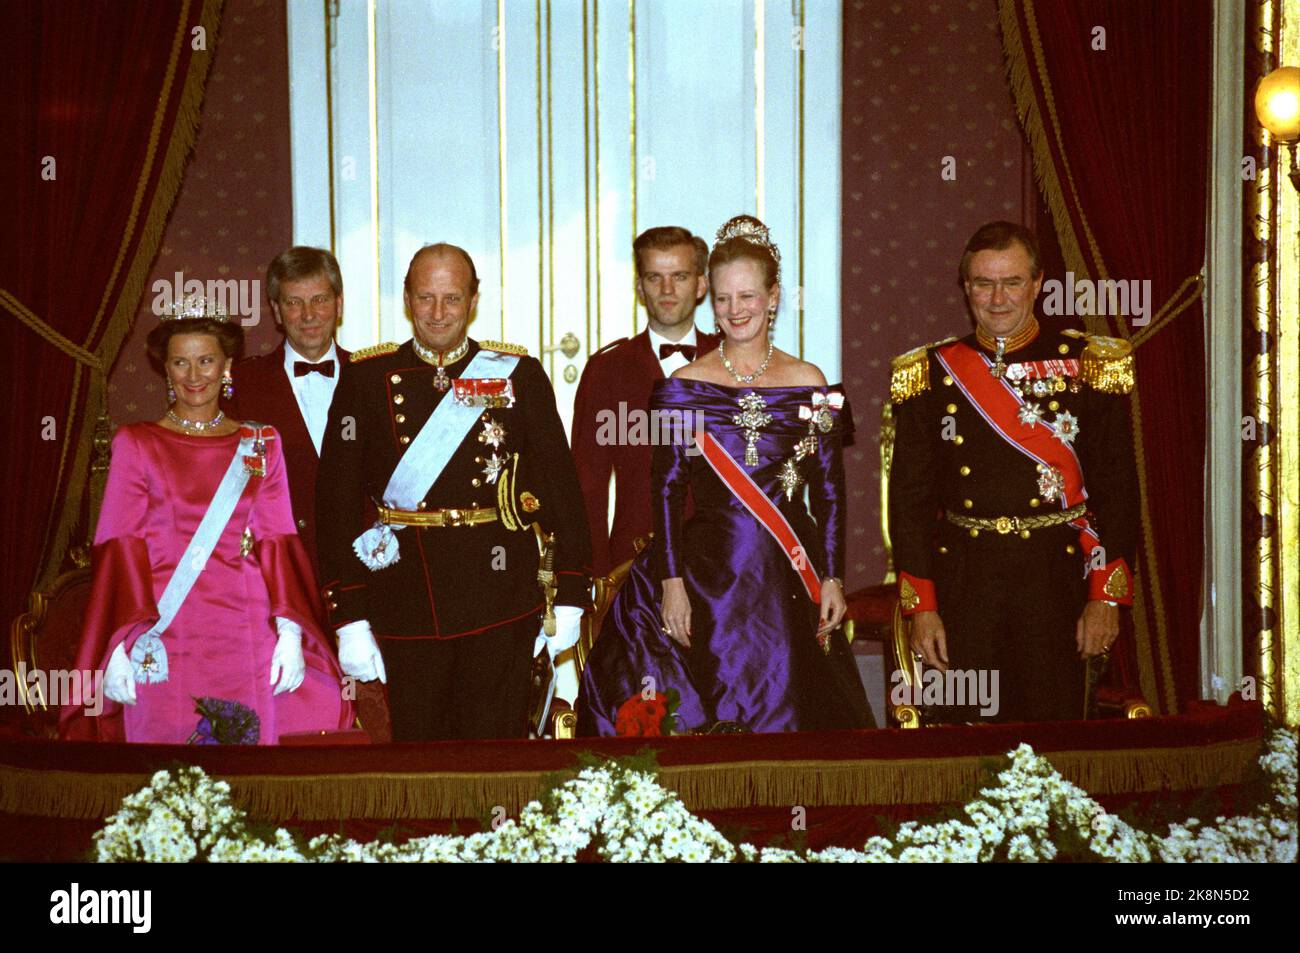 19911029 The royal couple in Denmark. Galla performance in royal theater. Queen Sonja, King Harald, drone Margrethe and Prince Henrik in the Queen Lodge. Photo: Bjørn Sigurdsøn, NTB Stock Photo